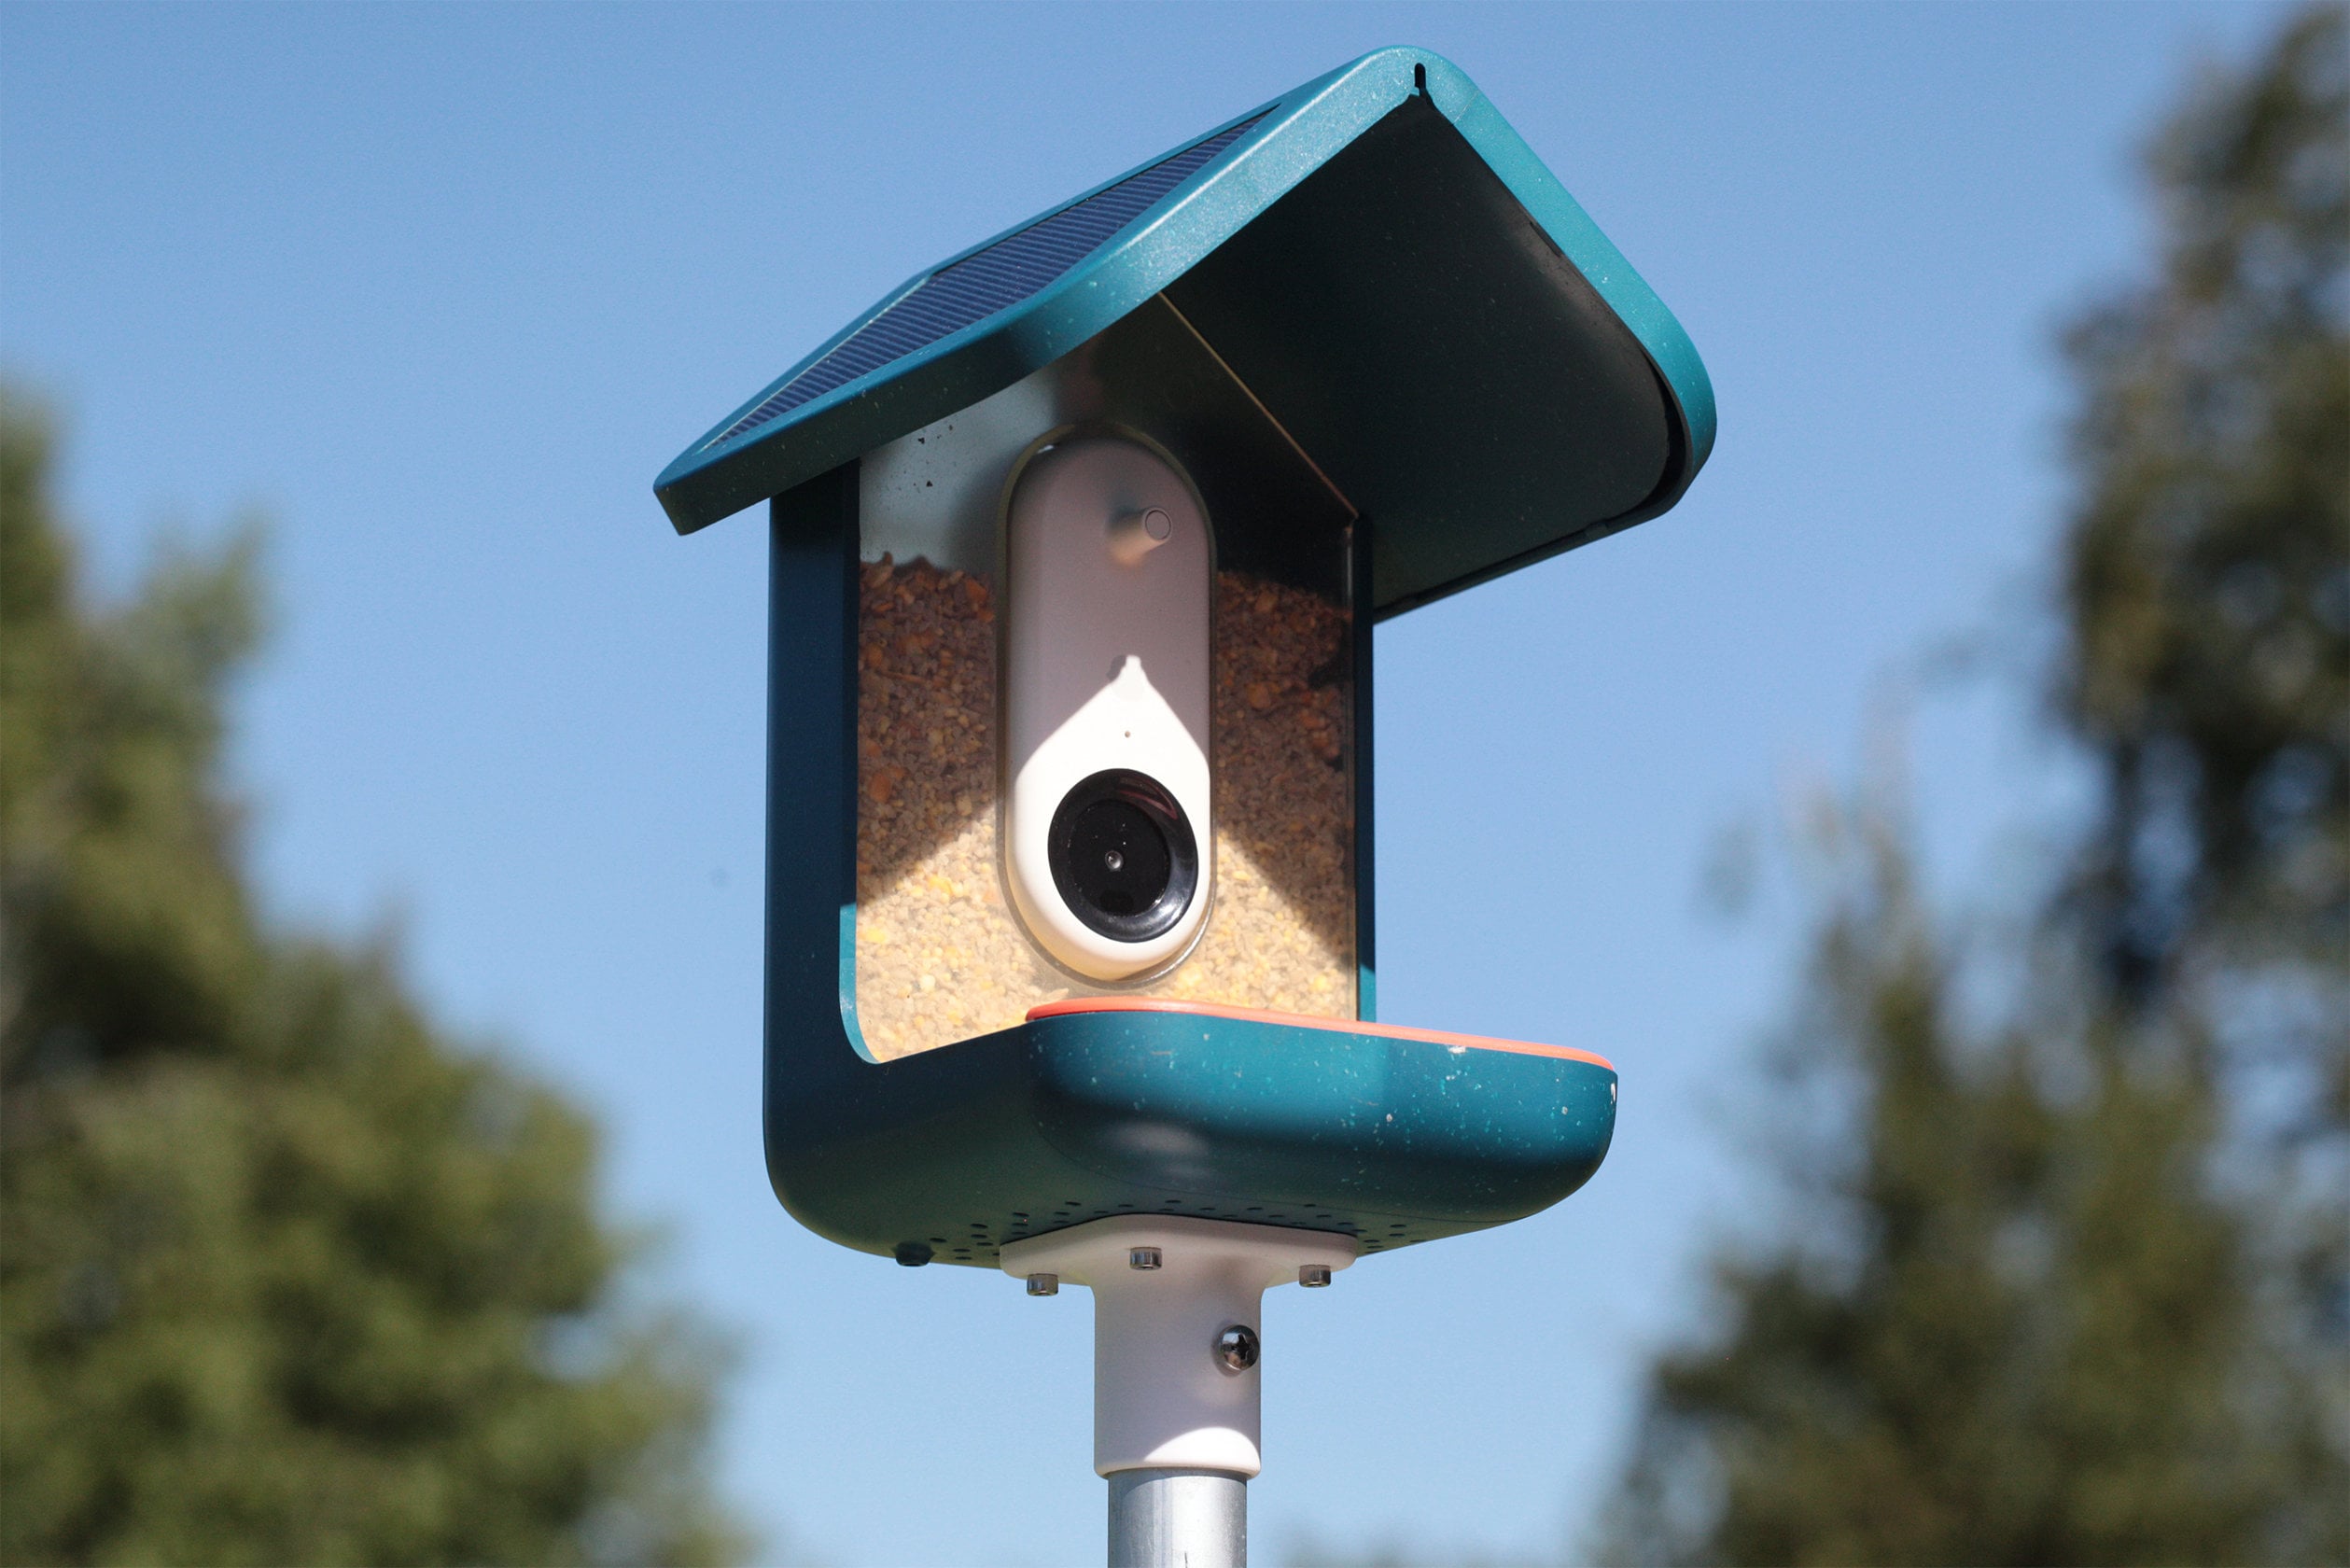 Tips for Setting Up the Bird Buddy and Mounting the Feeder Using the Wall  Mount with the APS 